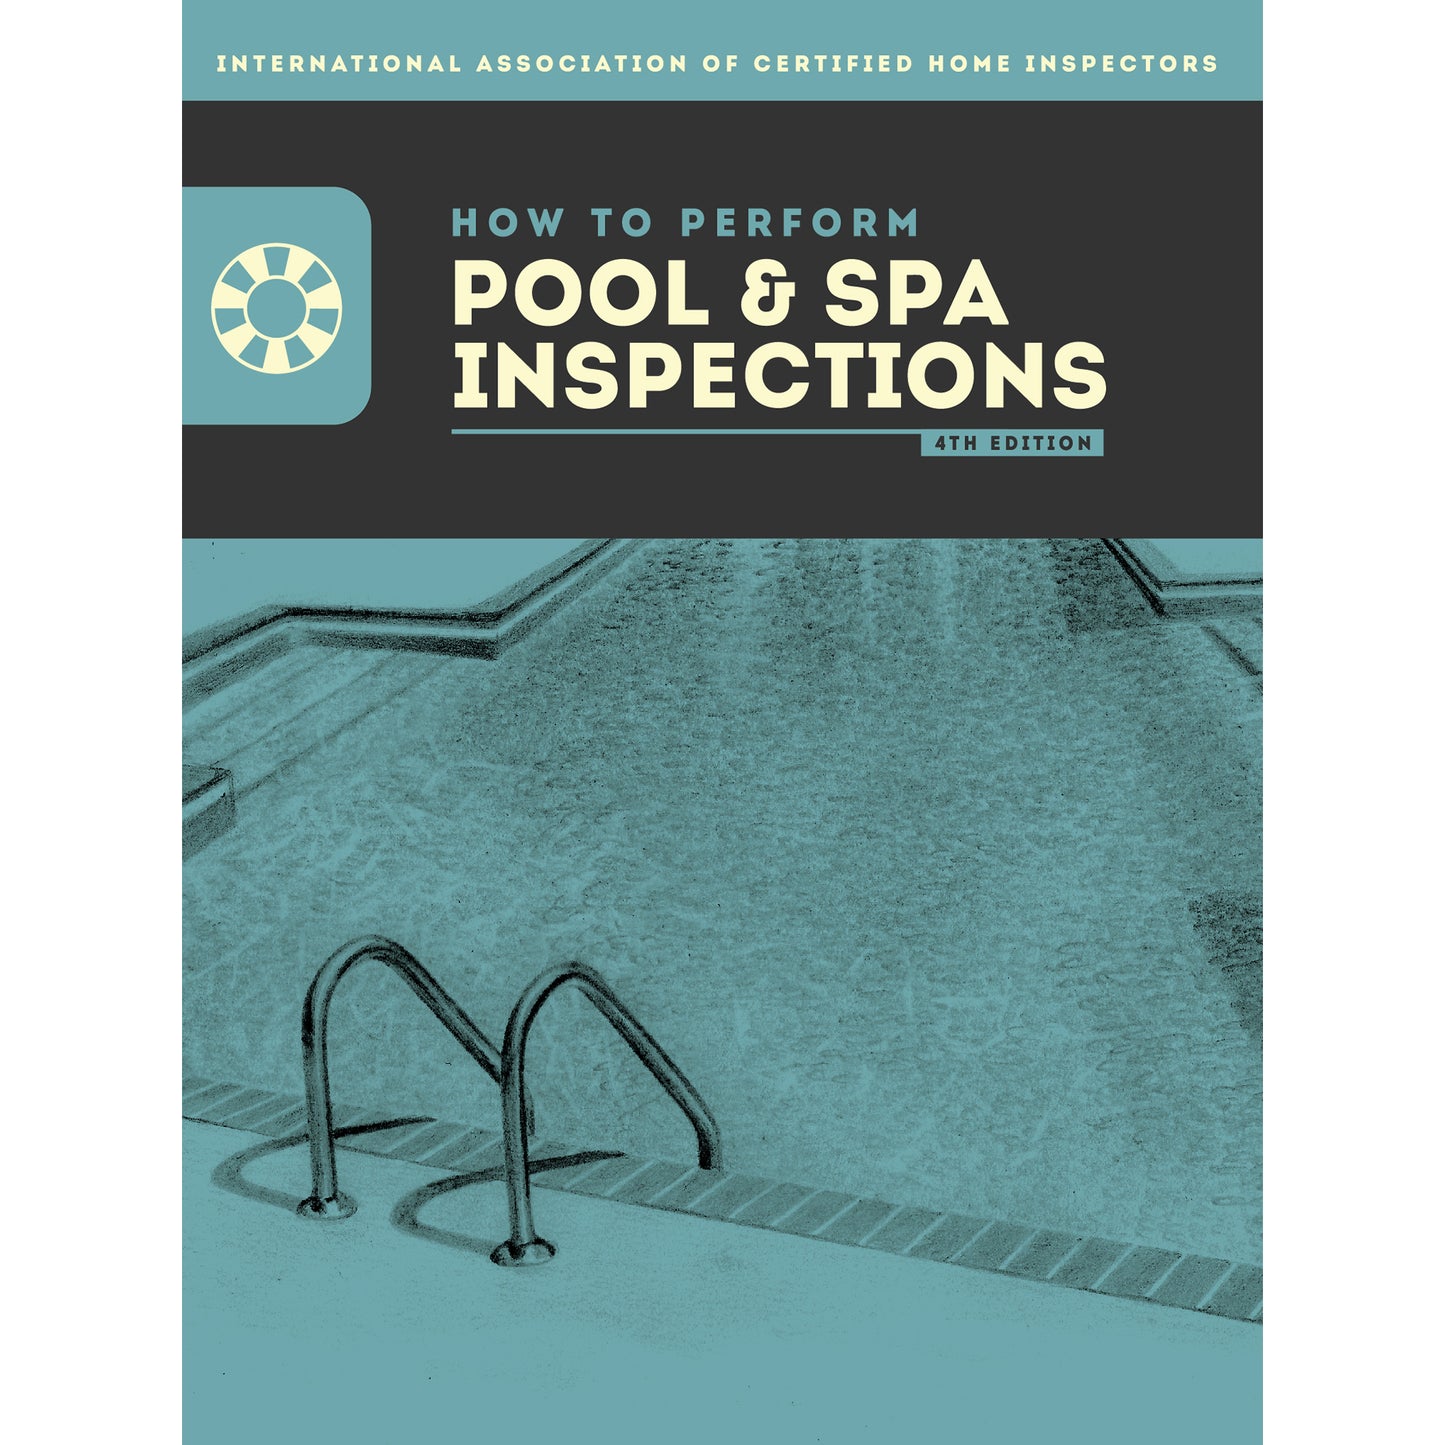 How to Perform Pool and Spa Inspections PDF Download